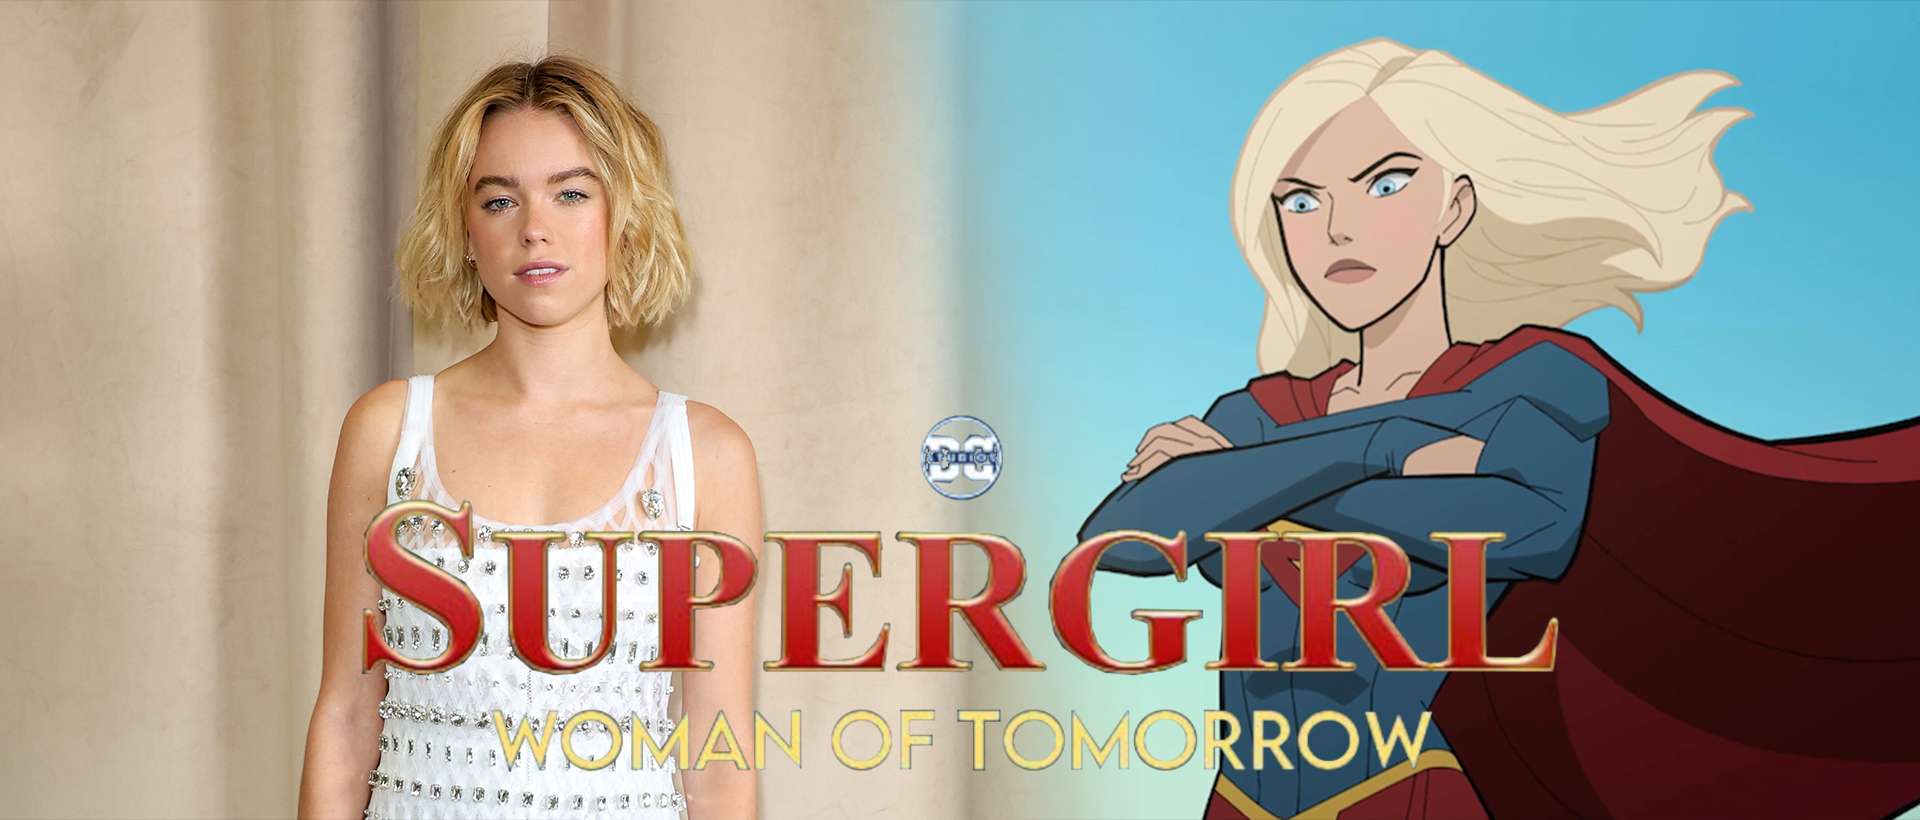 Milly Alcock supergirl woman of tomorrow banner